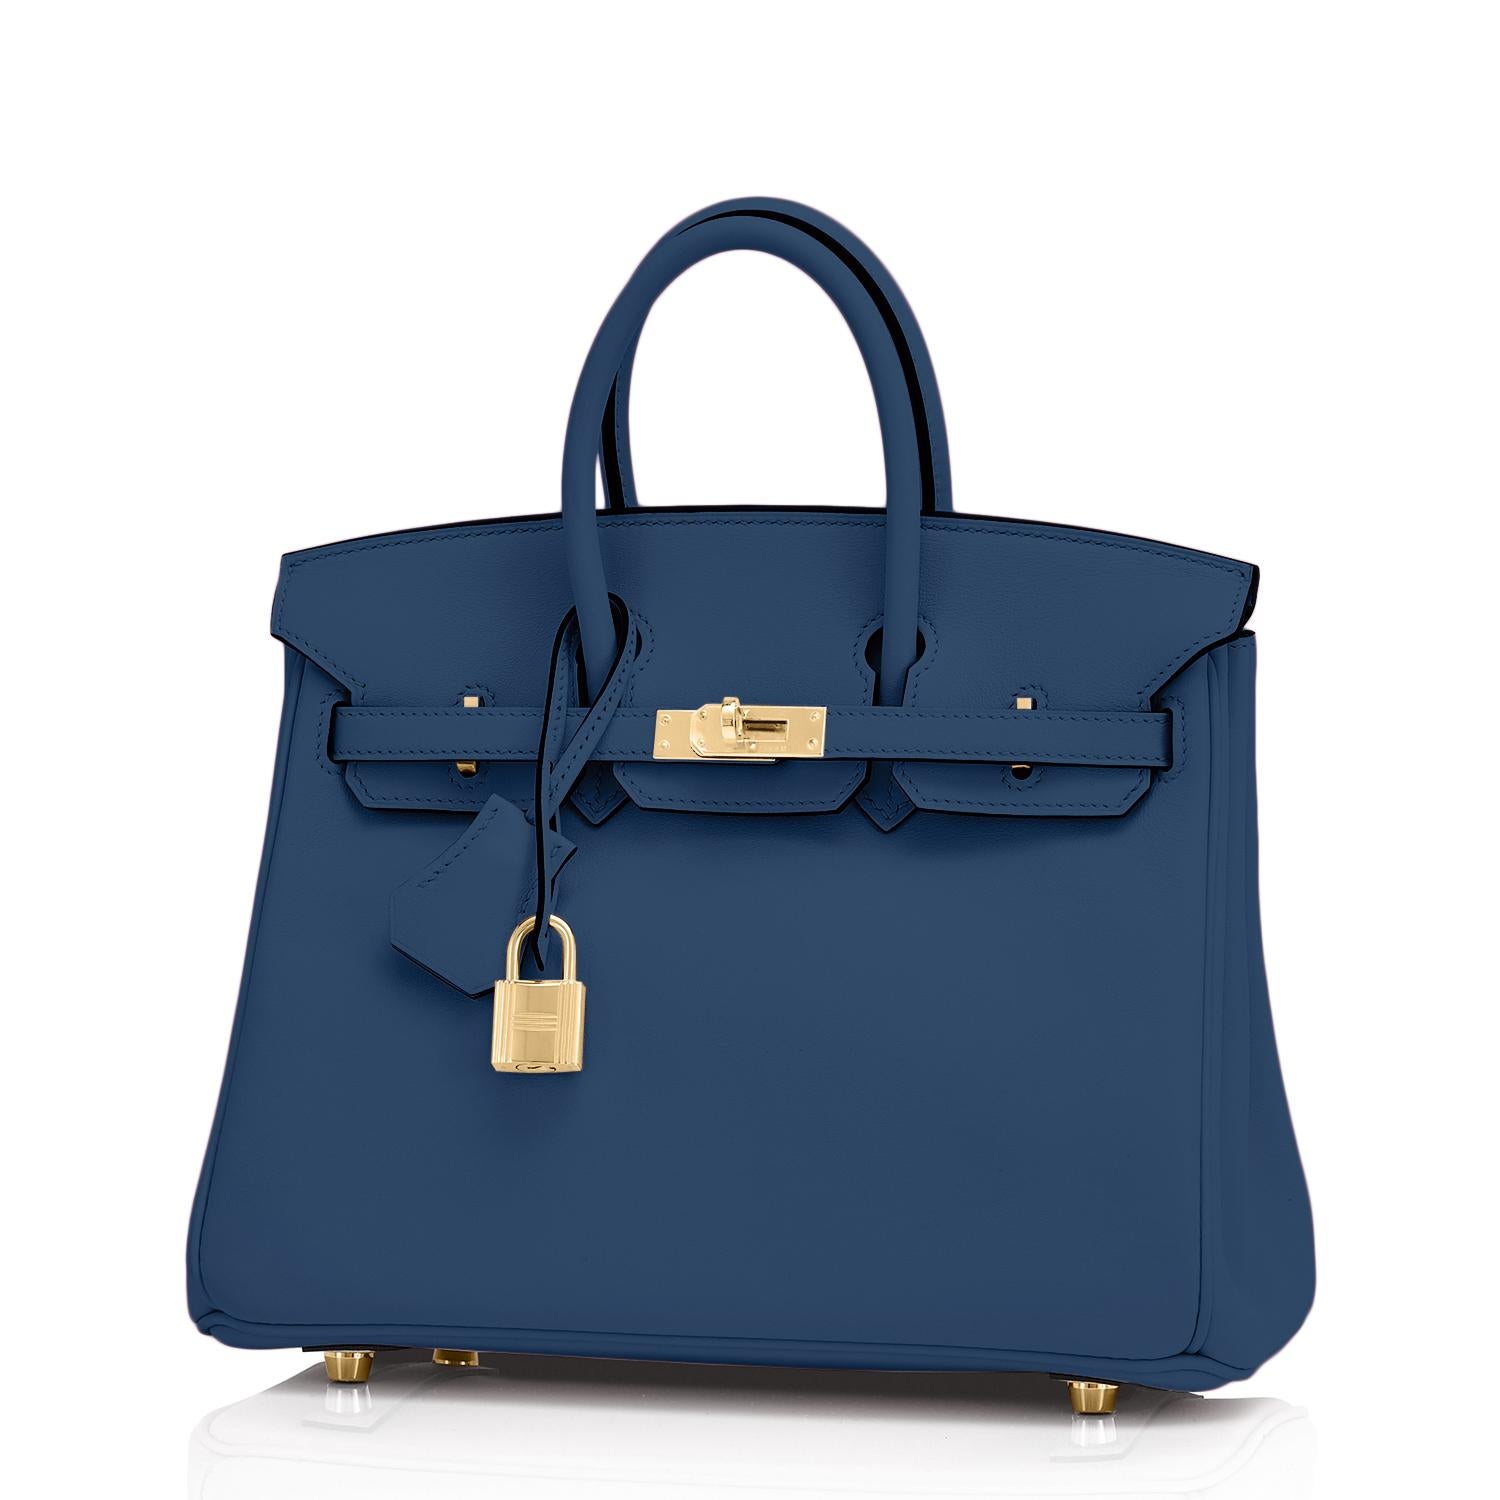 Hermes Birkin 25 Deep Blue Jewel Toned Navy Bag Gold Hardware Y Stamp, 2020
Sublime jewel-tone Deep Blue is gorgeous and perfectly on point for the top color trend of the new year.
Brand New in Box. Store Fresh. Pristine Condition (with plastic on